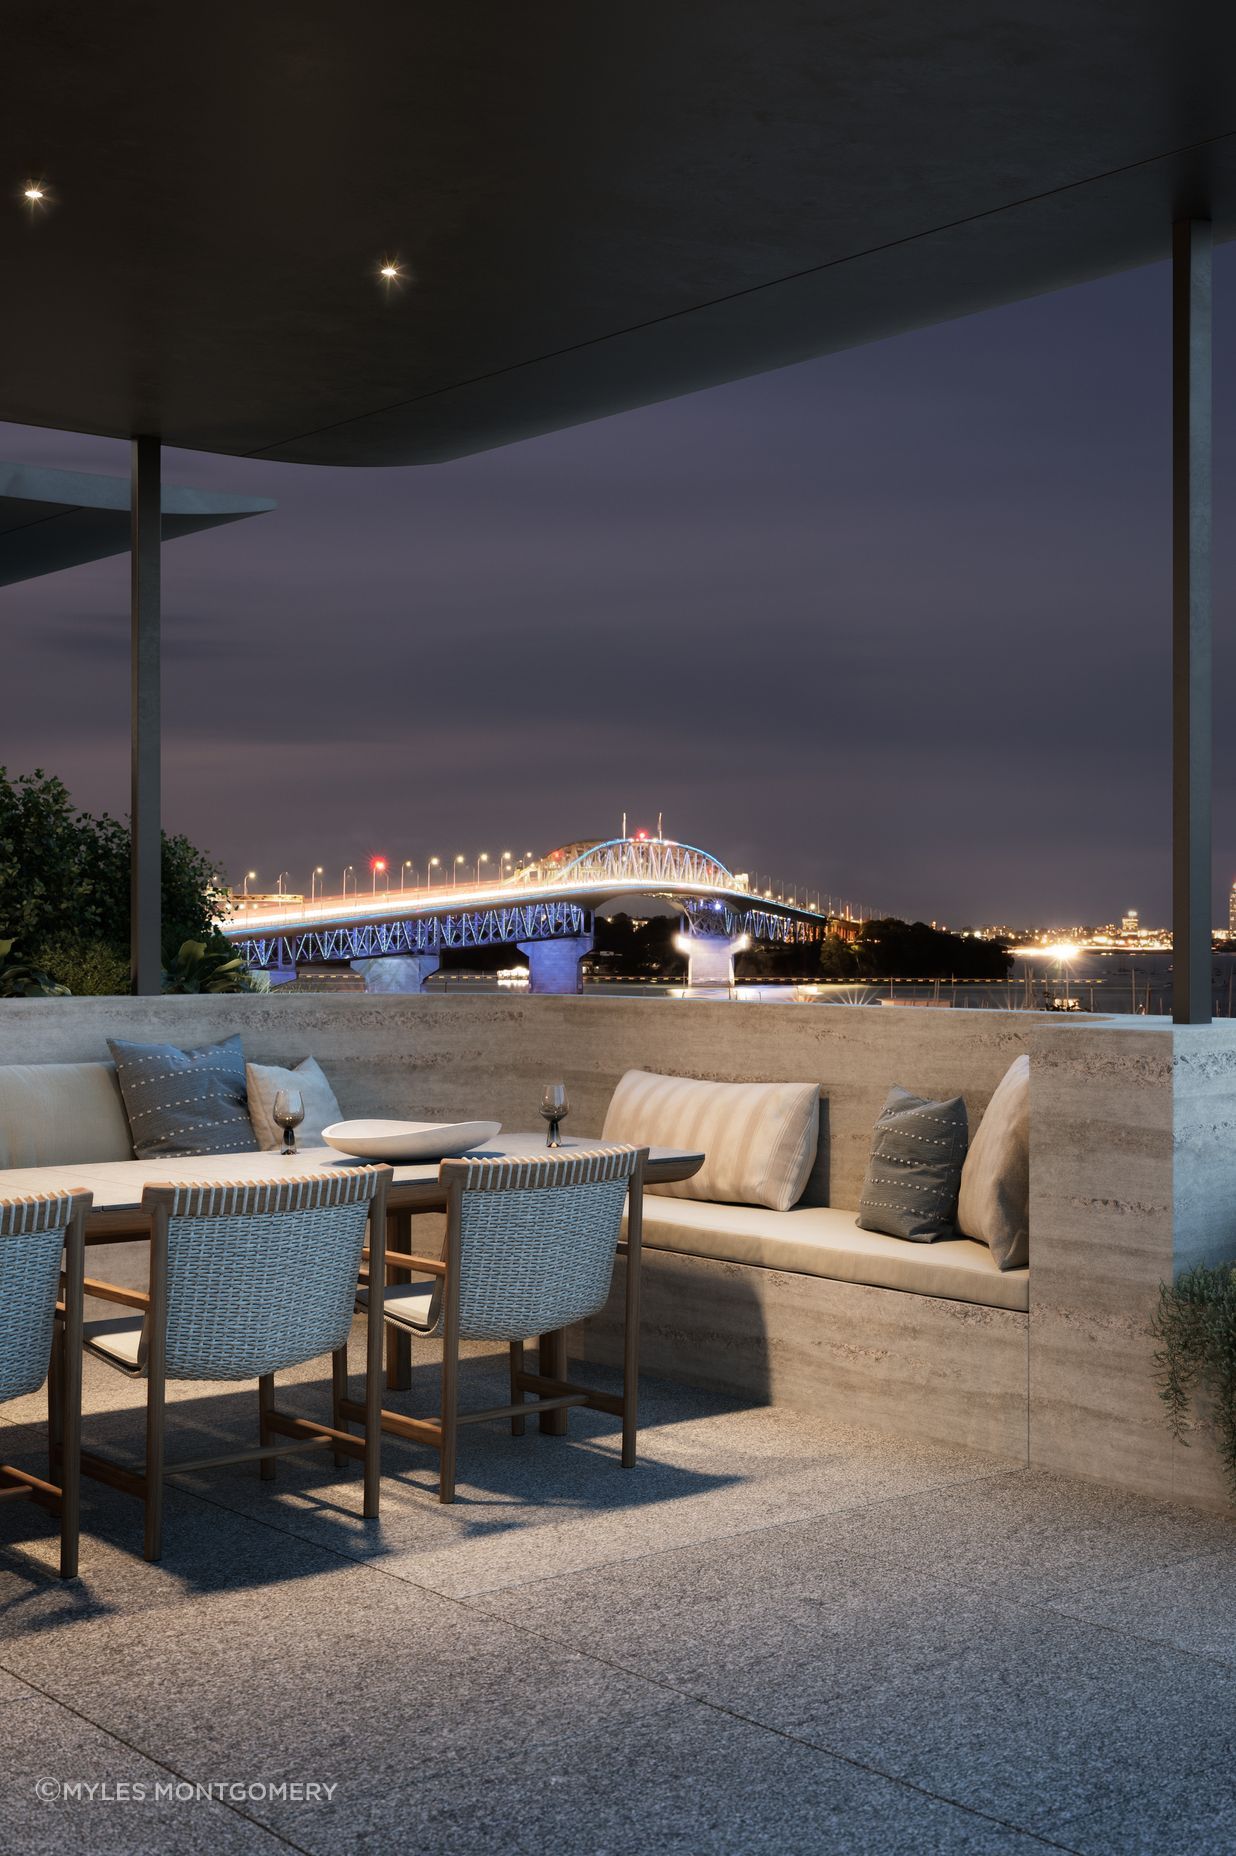 Terrace dining offers views of the Auckland Harbour bridge on the Waitemata harbour.